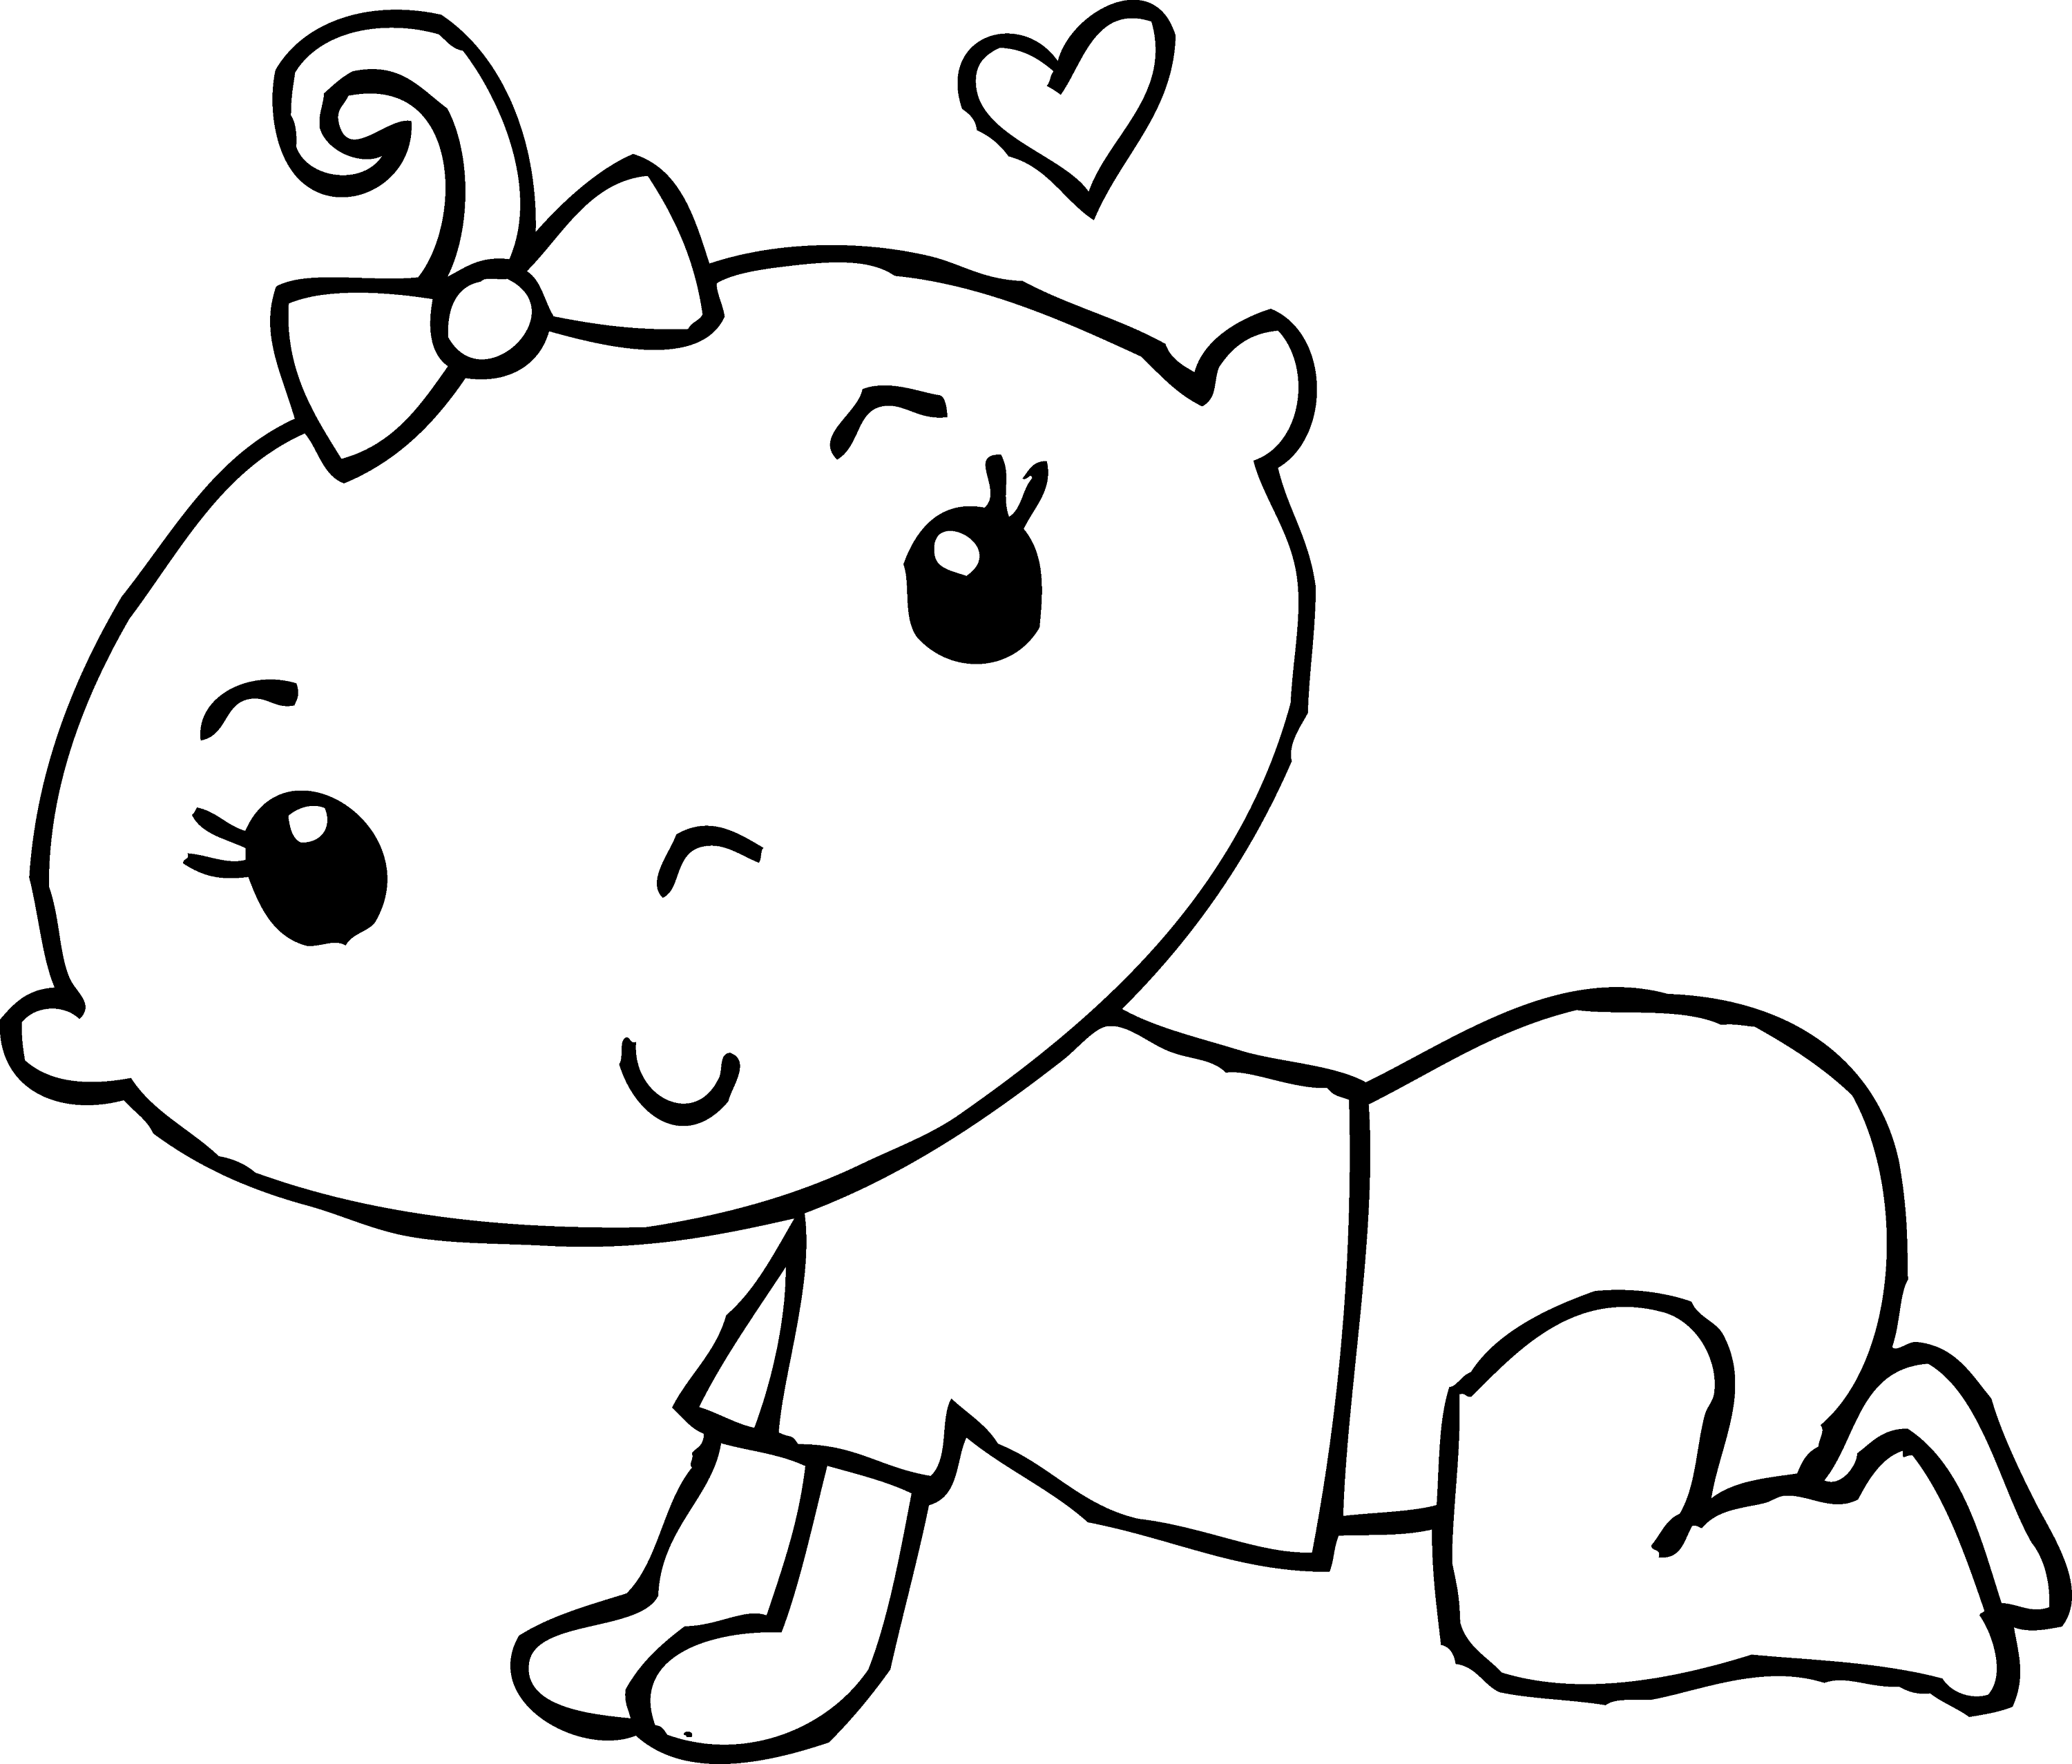 Baby Pictures Coloring Pages Pdf - Baby girl Pictures Coloring Pages